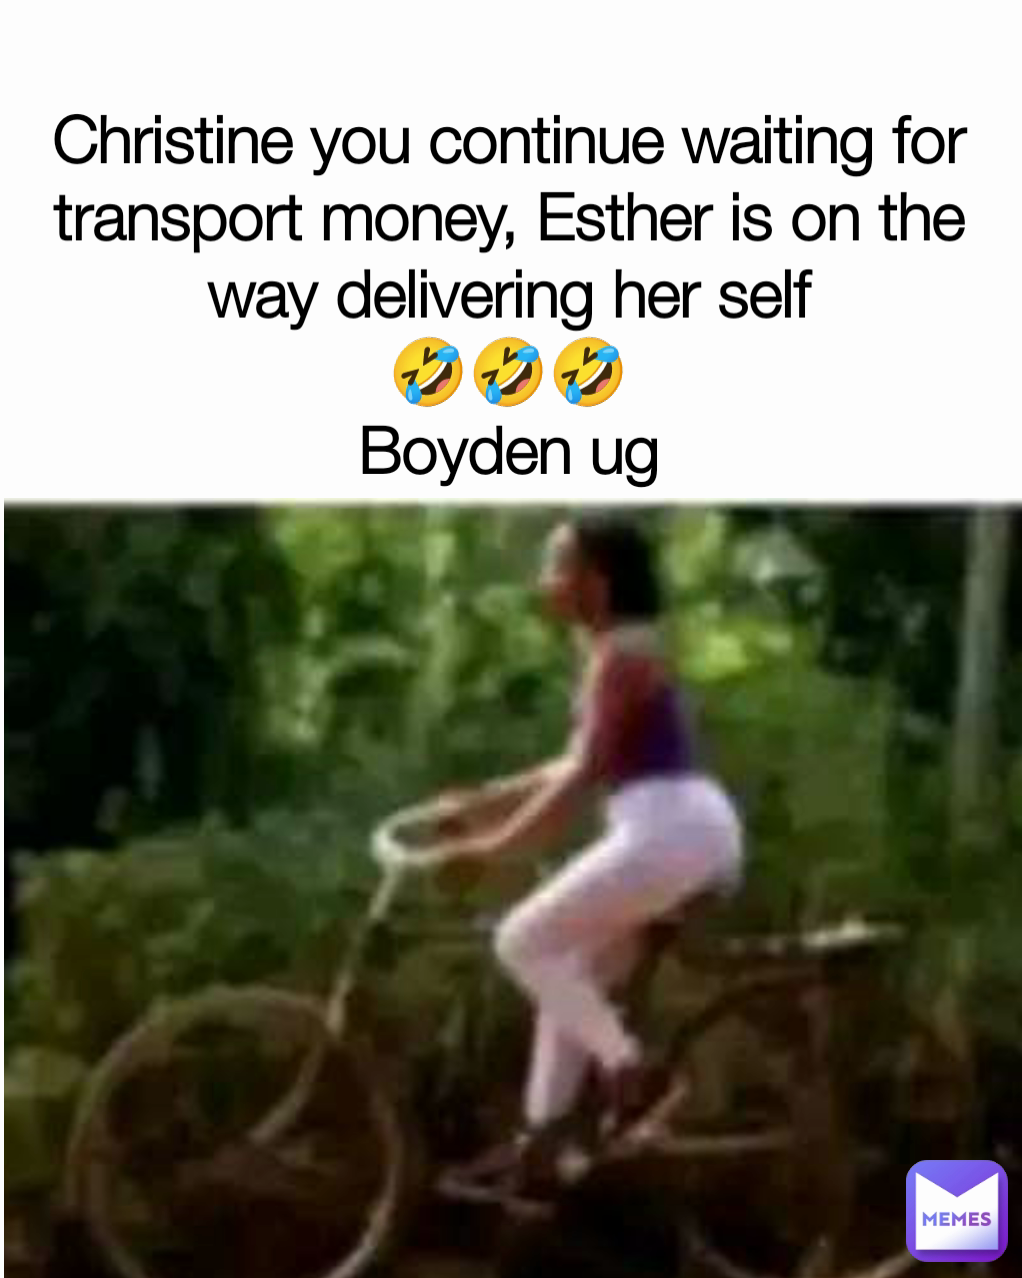 Christine you continue waiting for transport money, Esther is on the way delivering her self
🤣🤣🤣
Boyden ug